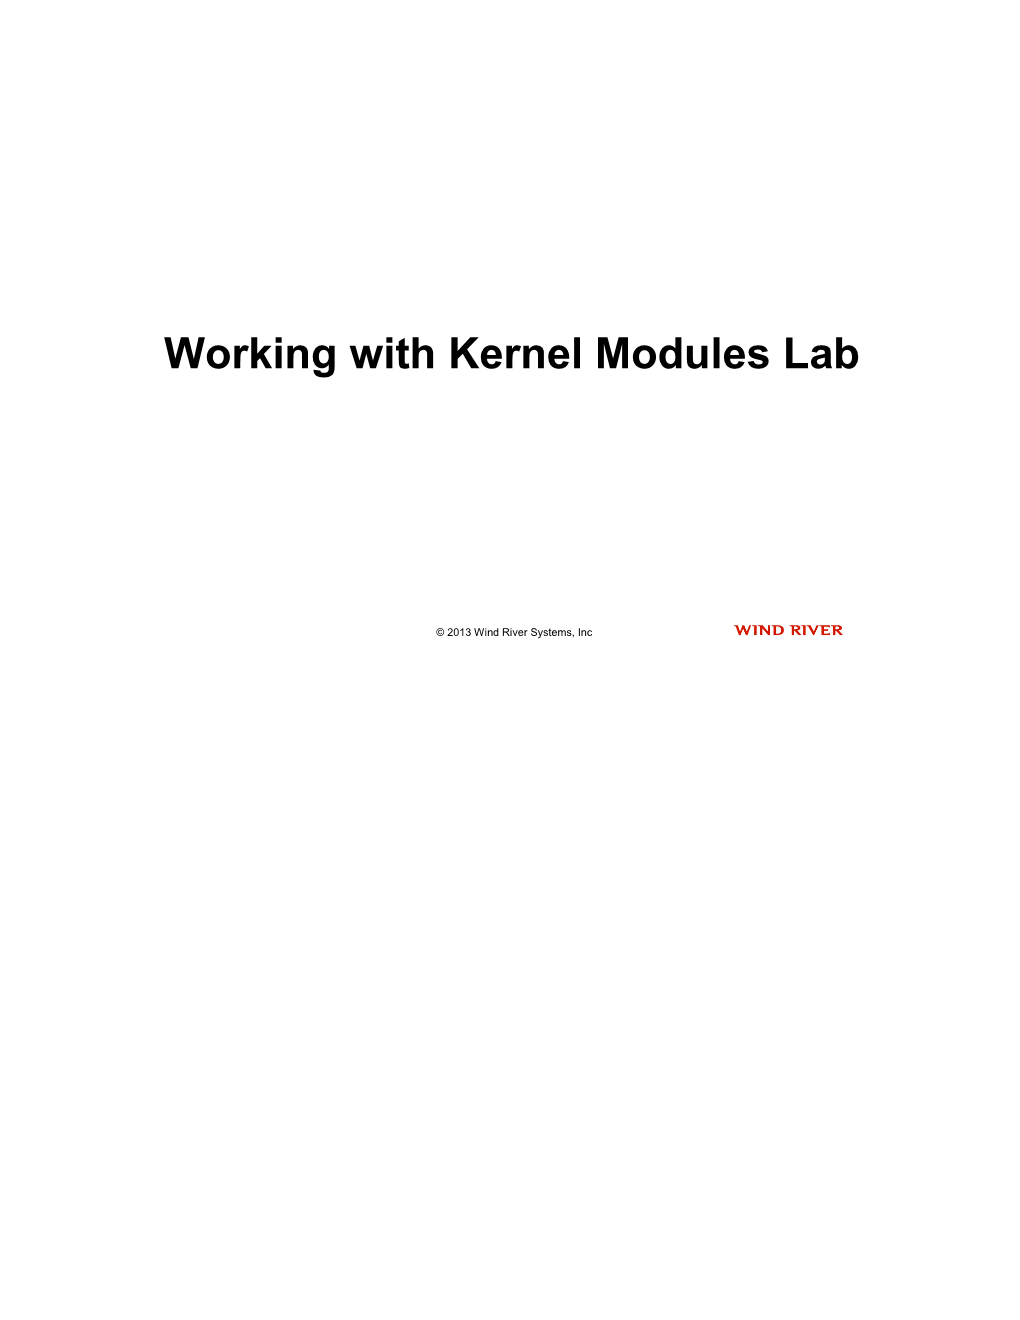 Working with Kernel Modules Lab